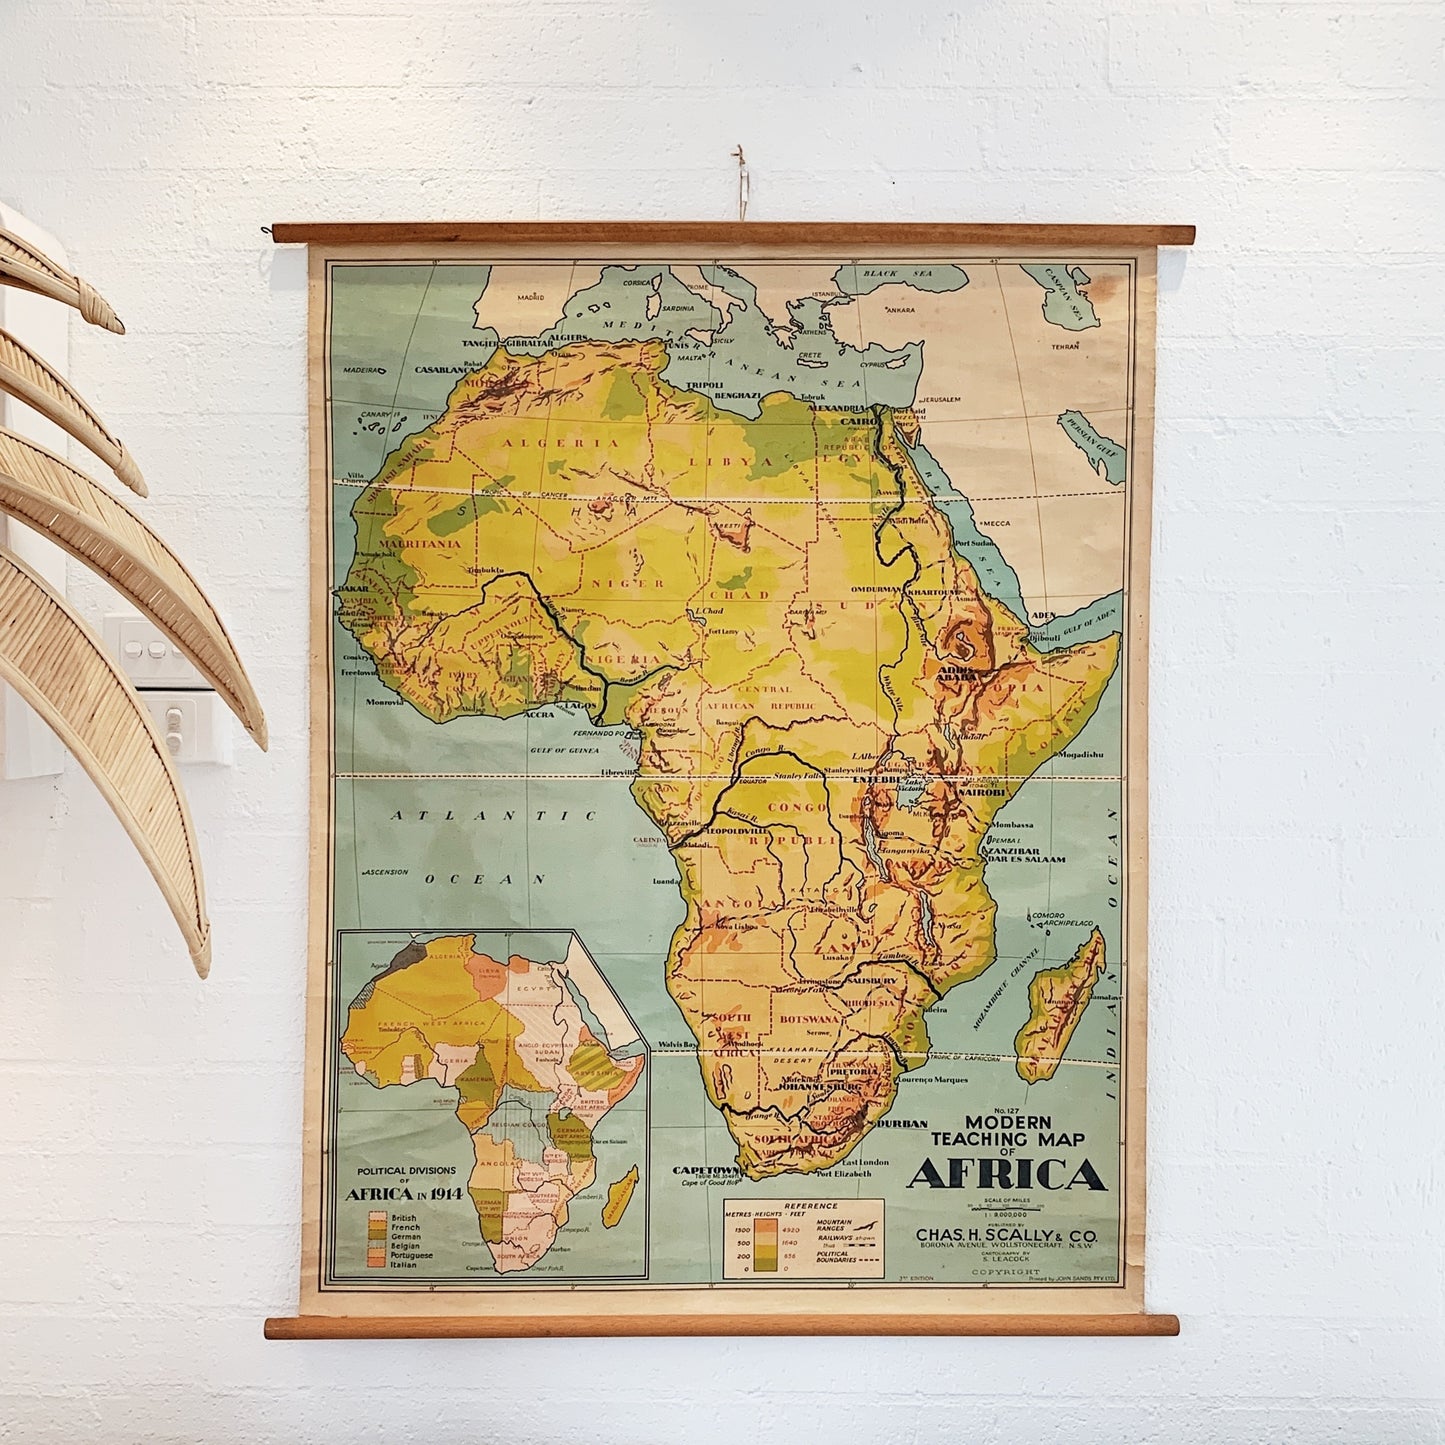 Vintage Chas H Scally & Co. Wall Hanging Teaching Map Of Africa